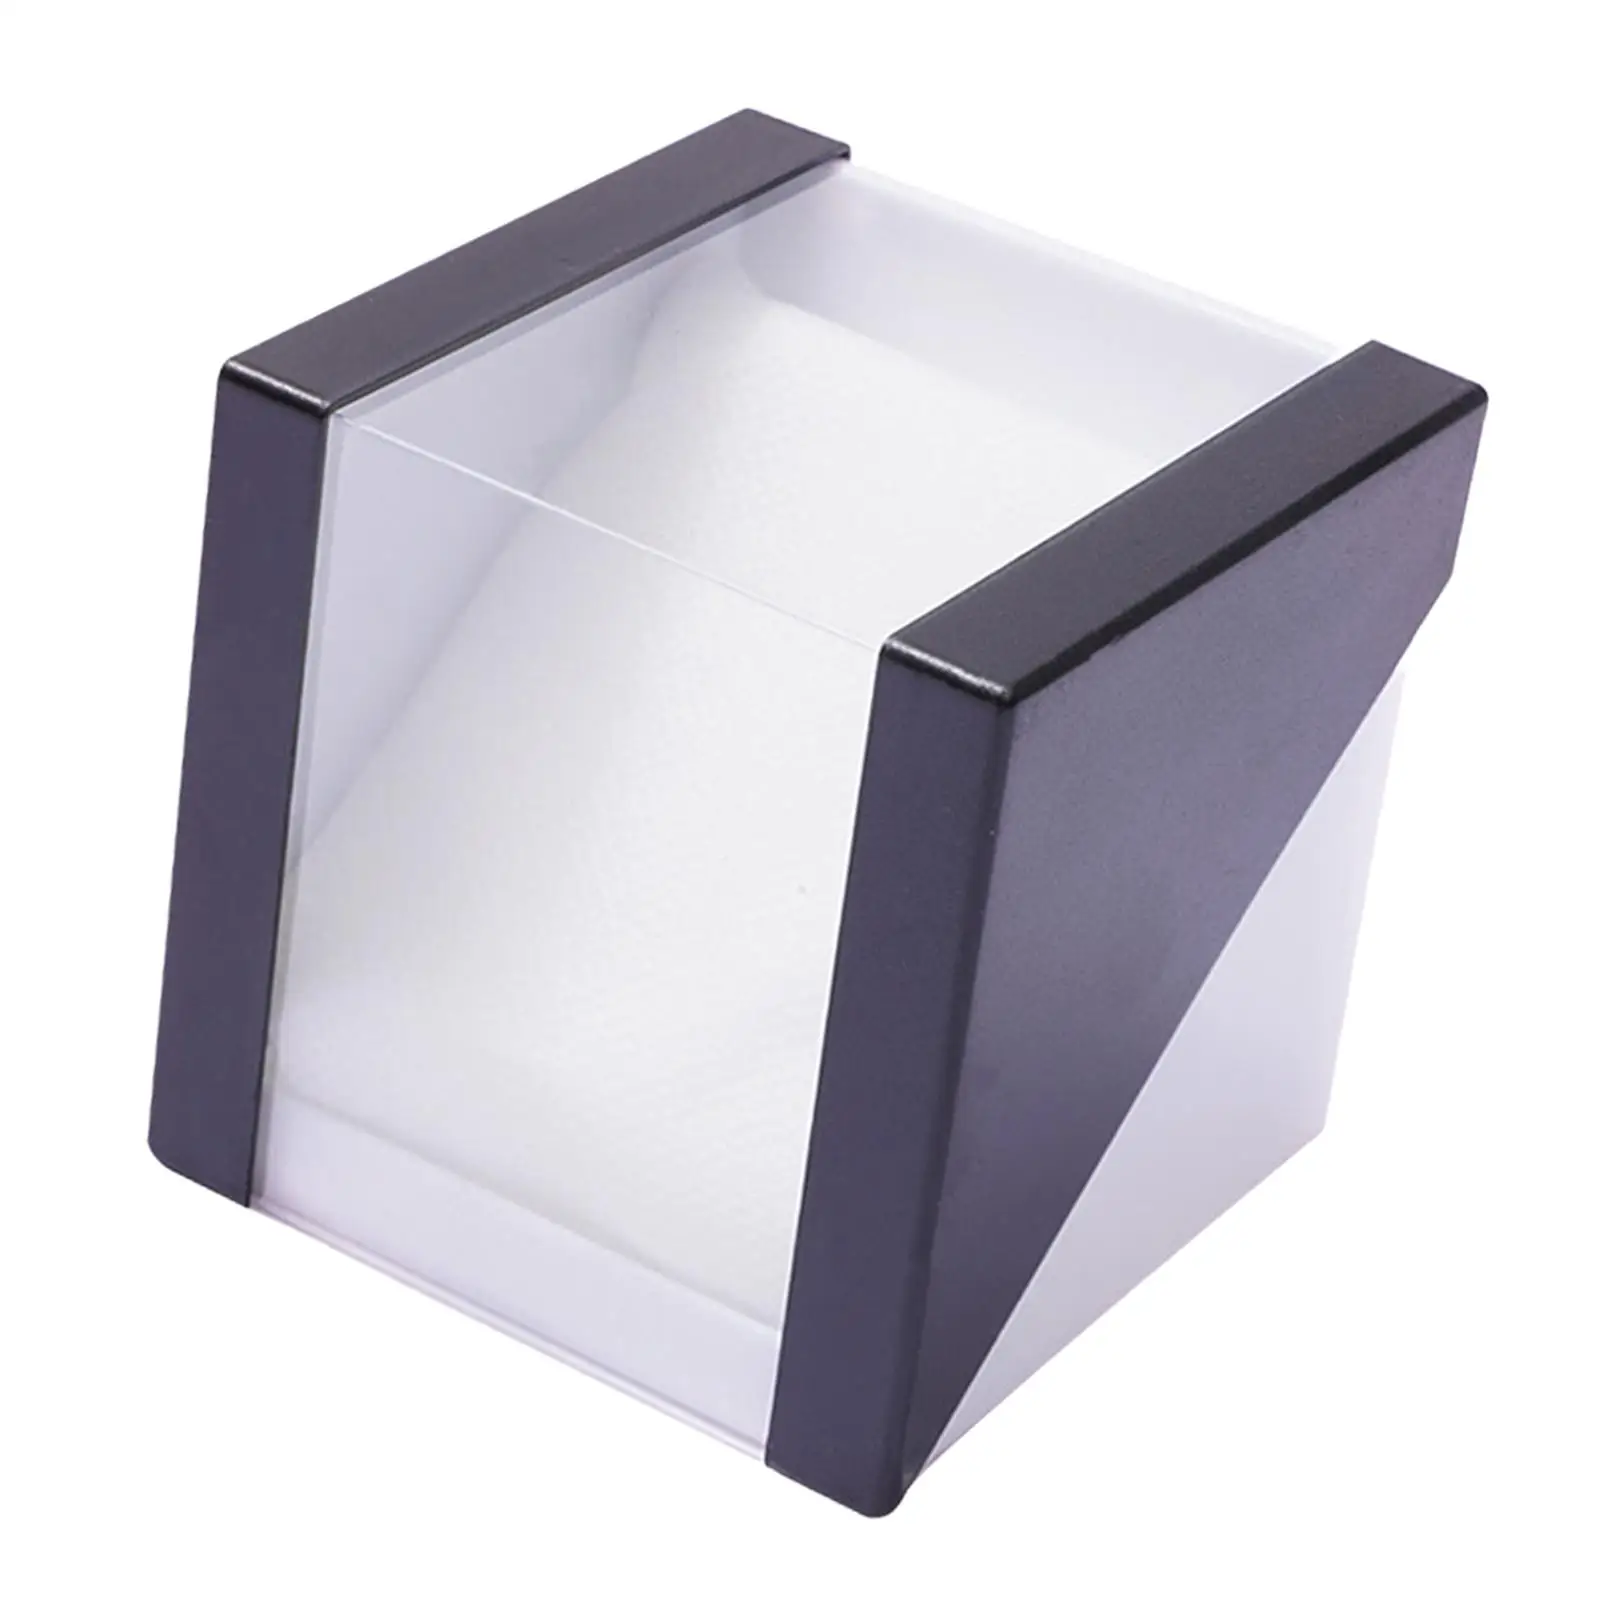 Single Slot Watch Box for Women Men with Pillow Bangle Pillow Box Watch Case Bangle Jewelry Organizer Display Storage Case